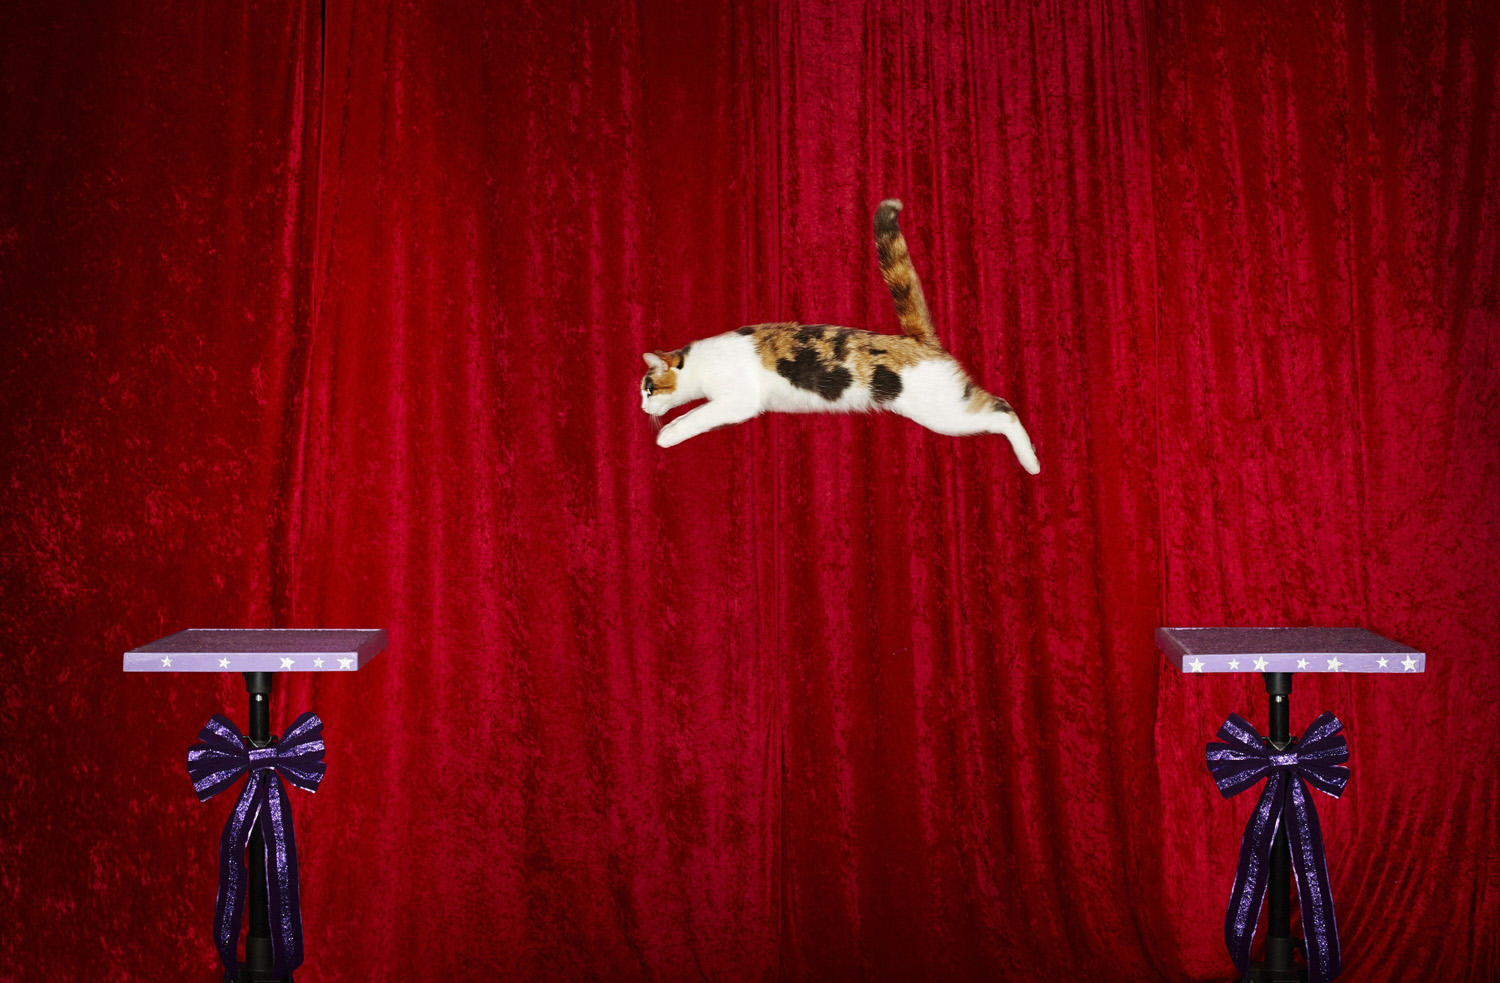 Alley, a cat, of the United States secured her place in the 2015 Guinness World Records book for the longest jump by a cat record, at six feet (1.83 metres).